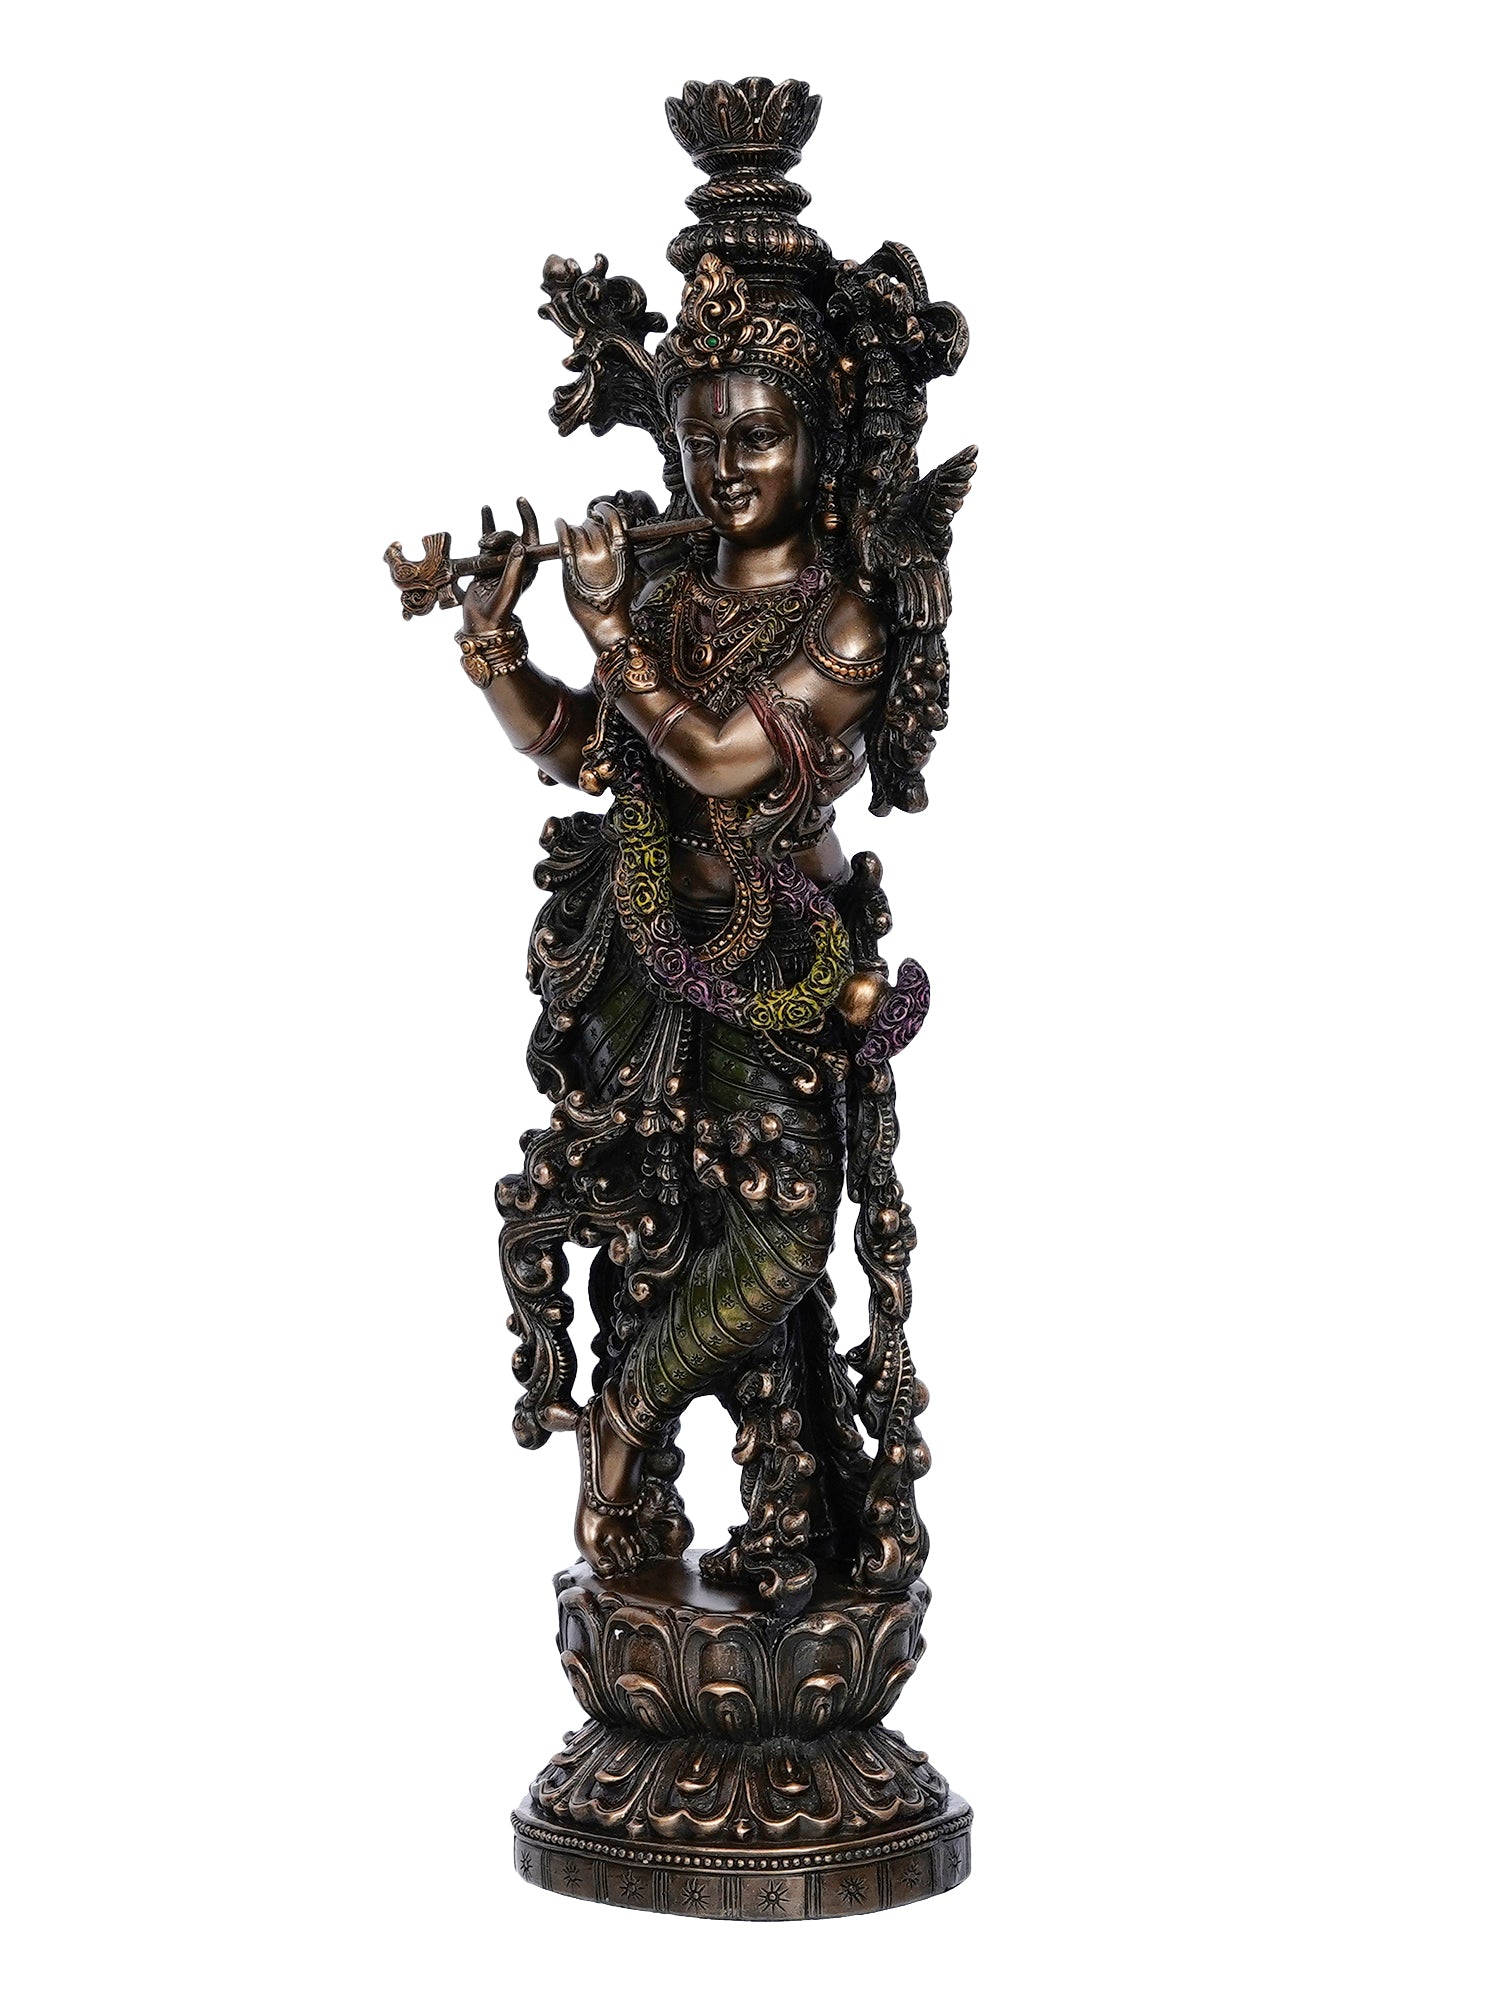 Brown Polyresin and Bronze Decorative Ethnic Carved Dancing Lord Krishna Playing Flute Figurine 4